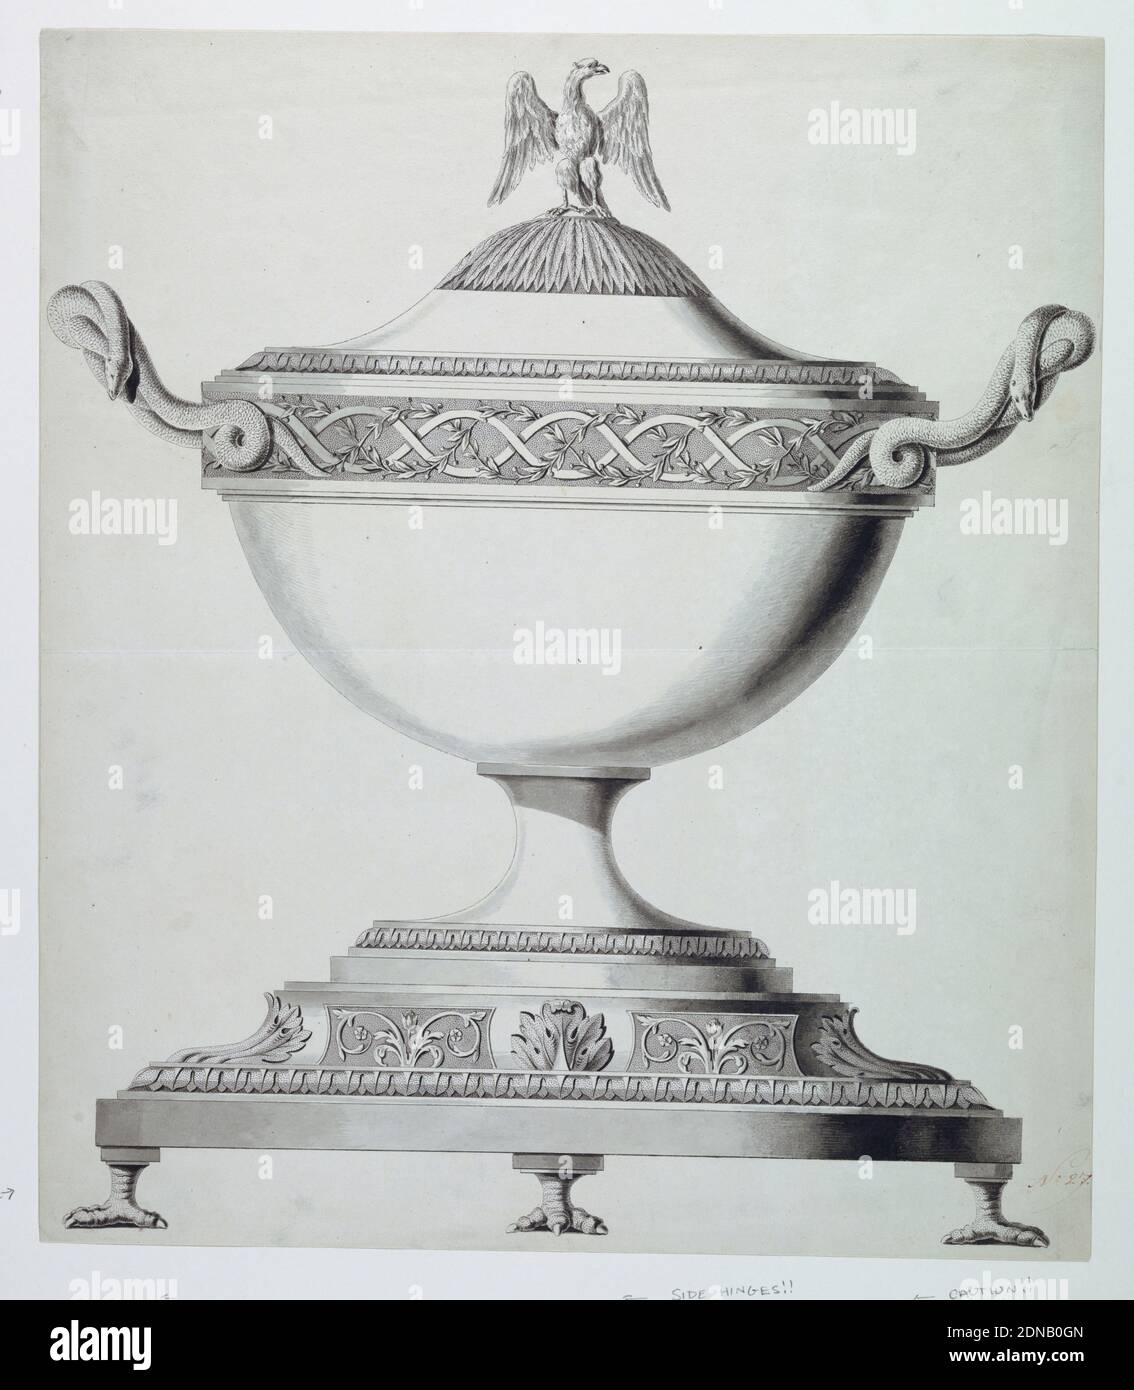 Design for a Tureen, Joseph Anton Seethaler II, German, 1799–1868, Pen and ink, brush and washes, The vessel is banded by an interweaving vine and ribbon meader. The finial is a spread eagle and coiled snakes form the handles. The base rests on birds' feet and is decorated with acanthus leaves and flowers., Germany, 1825-1835, Drawing Stock Photo